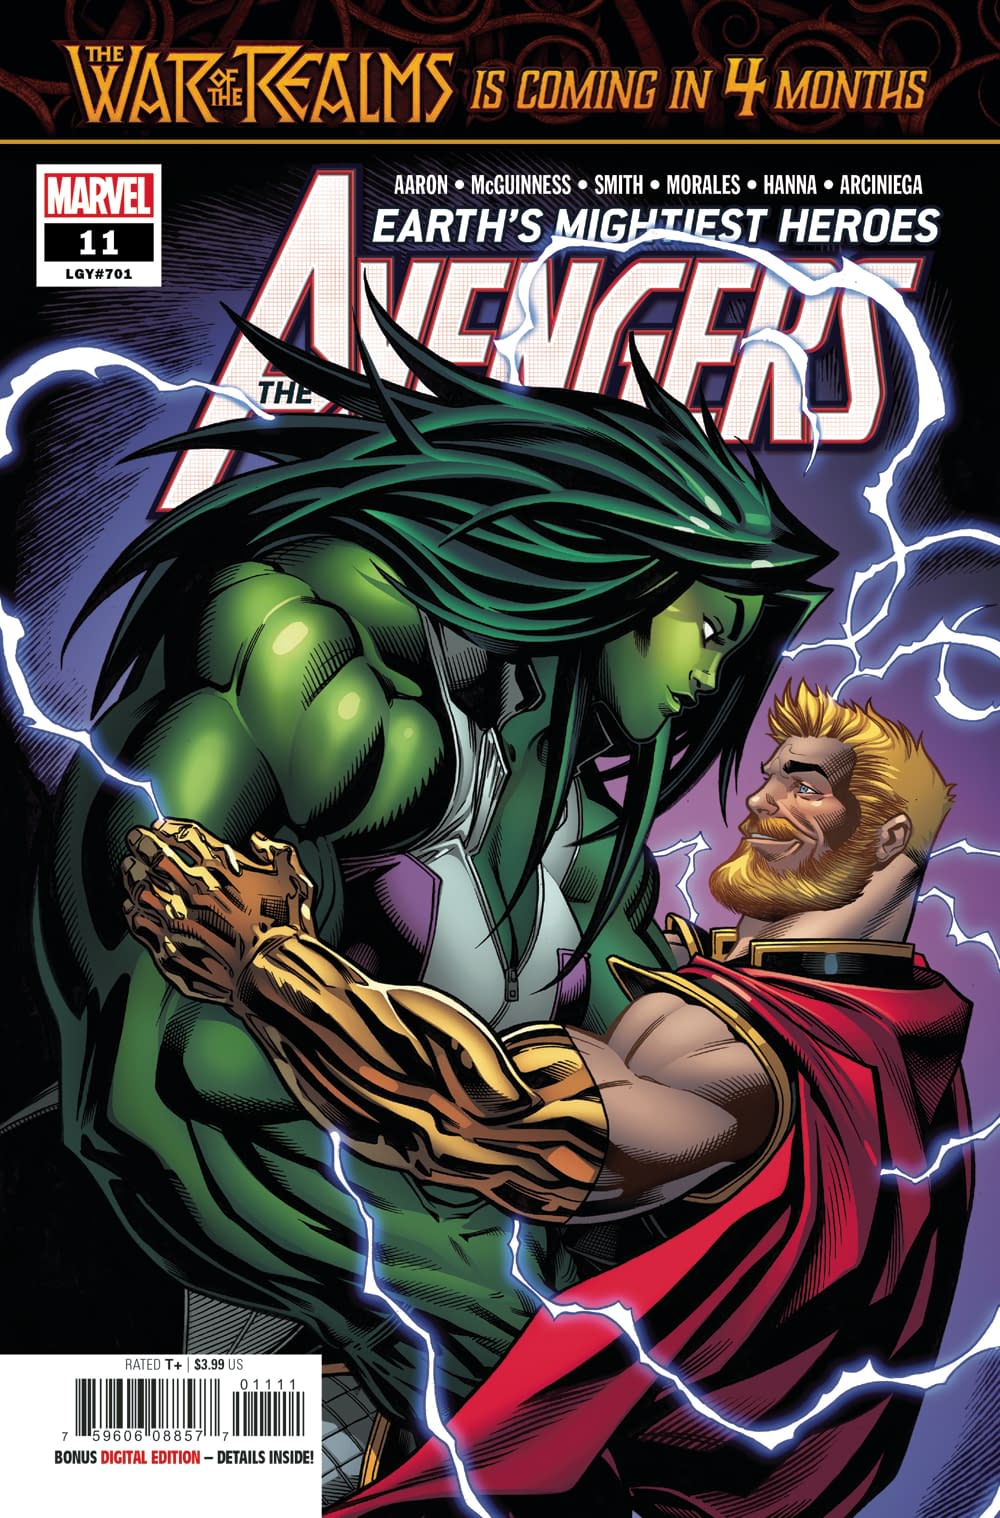 You Won't Believe What Thor Wants to Do with These Dinosaurs in Next Week's Avengers #11